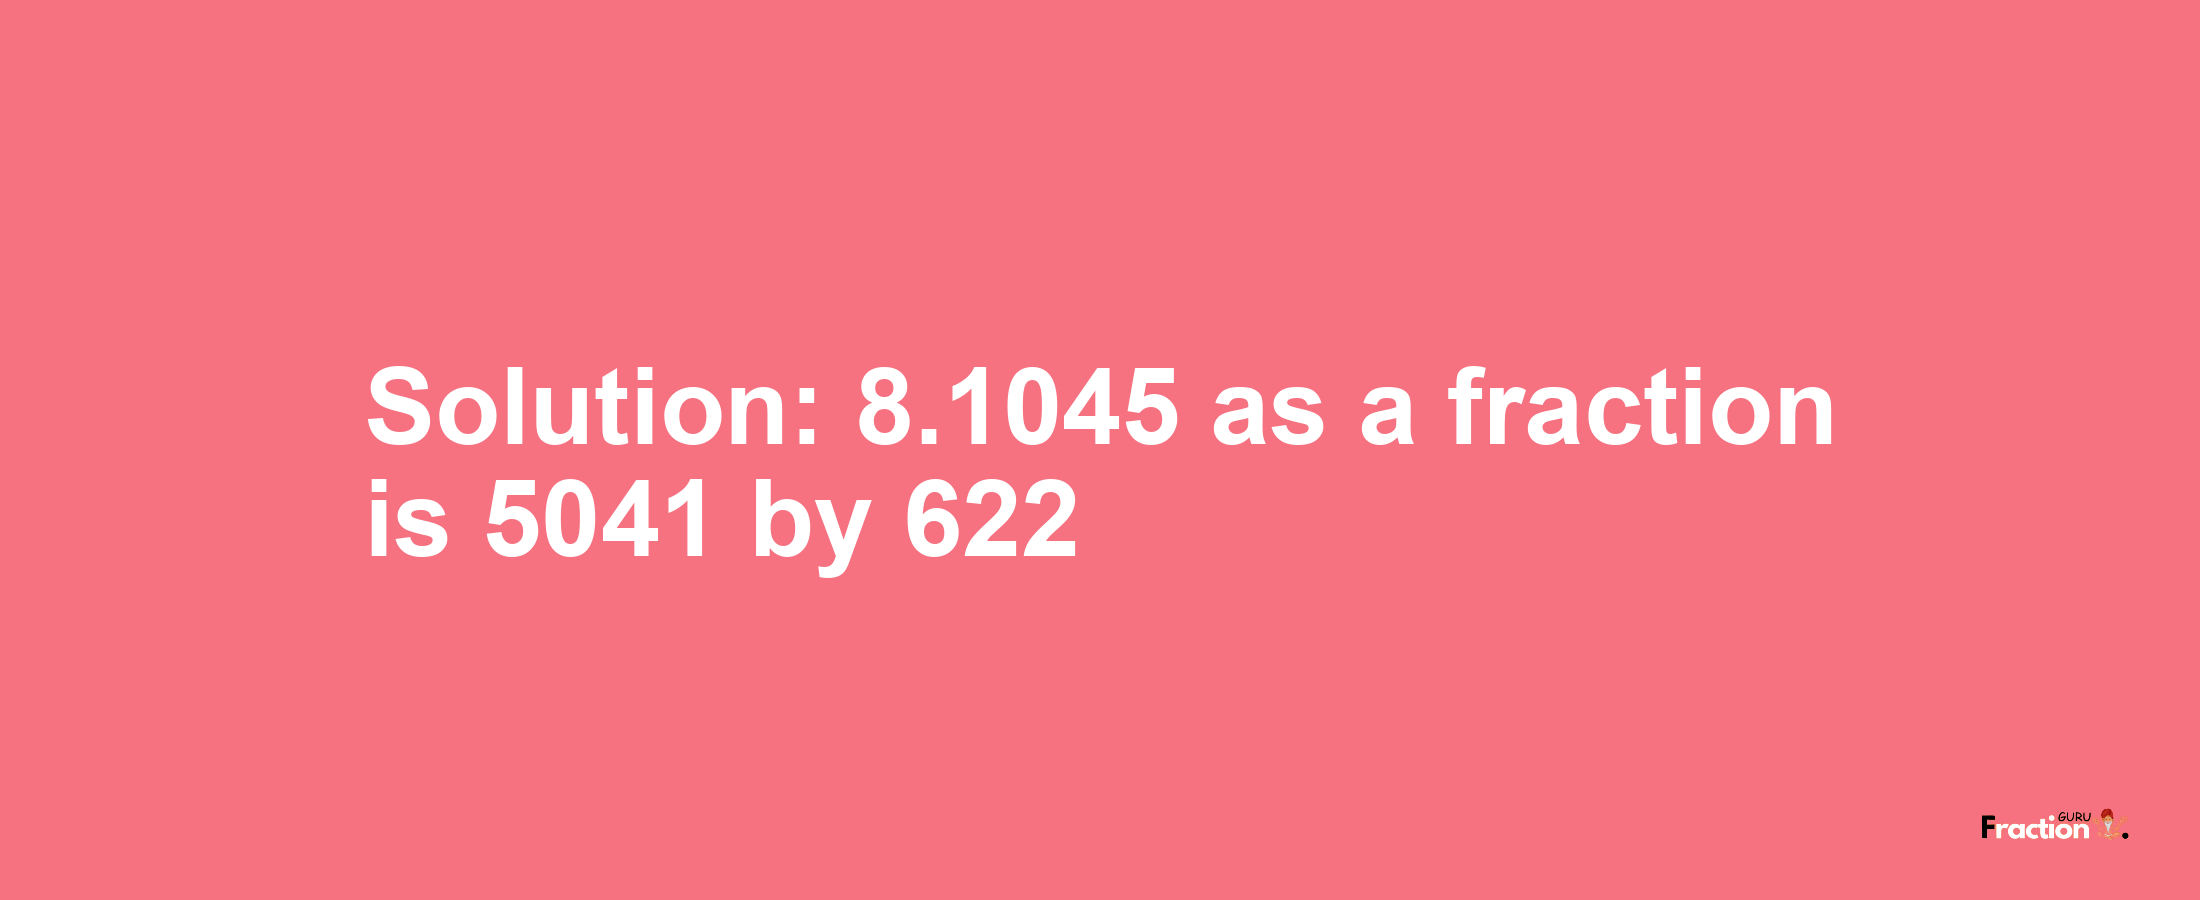 Solution:8.1045 as a fraction is 5041/622